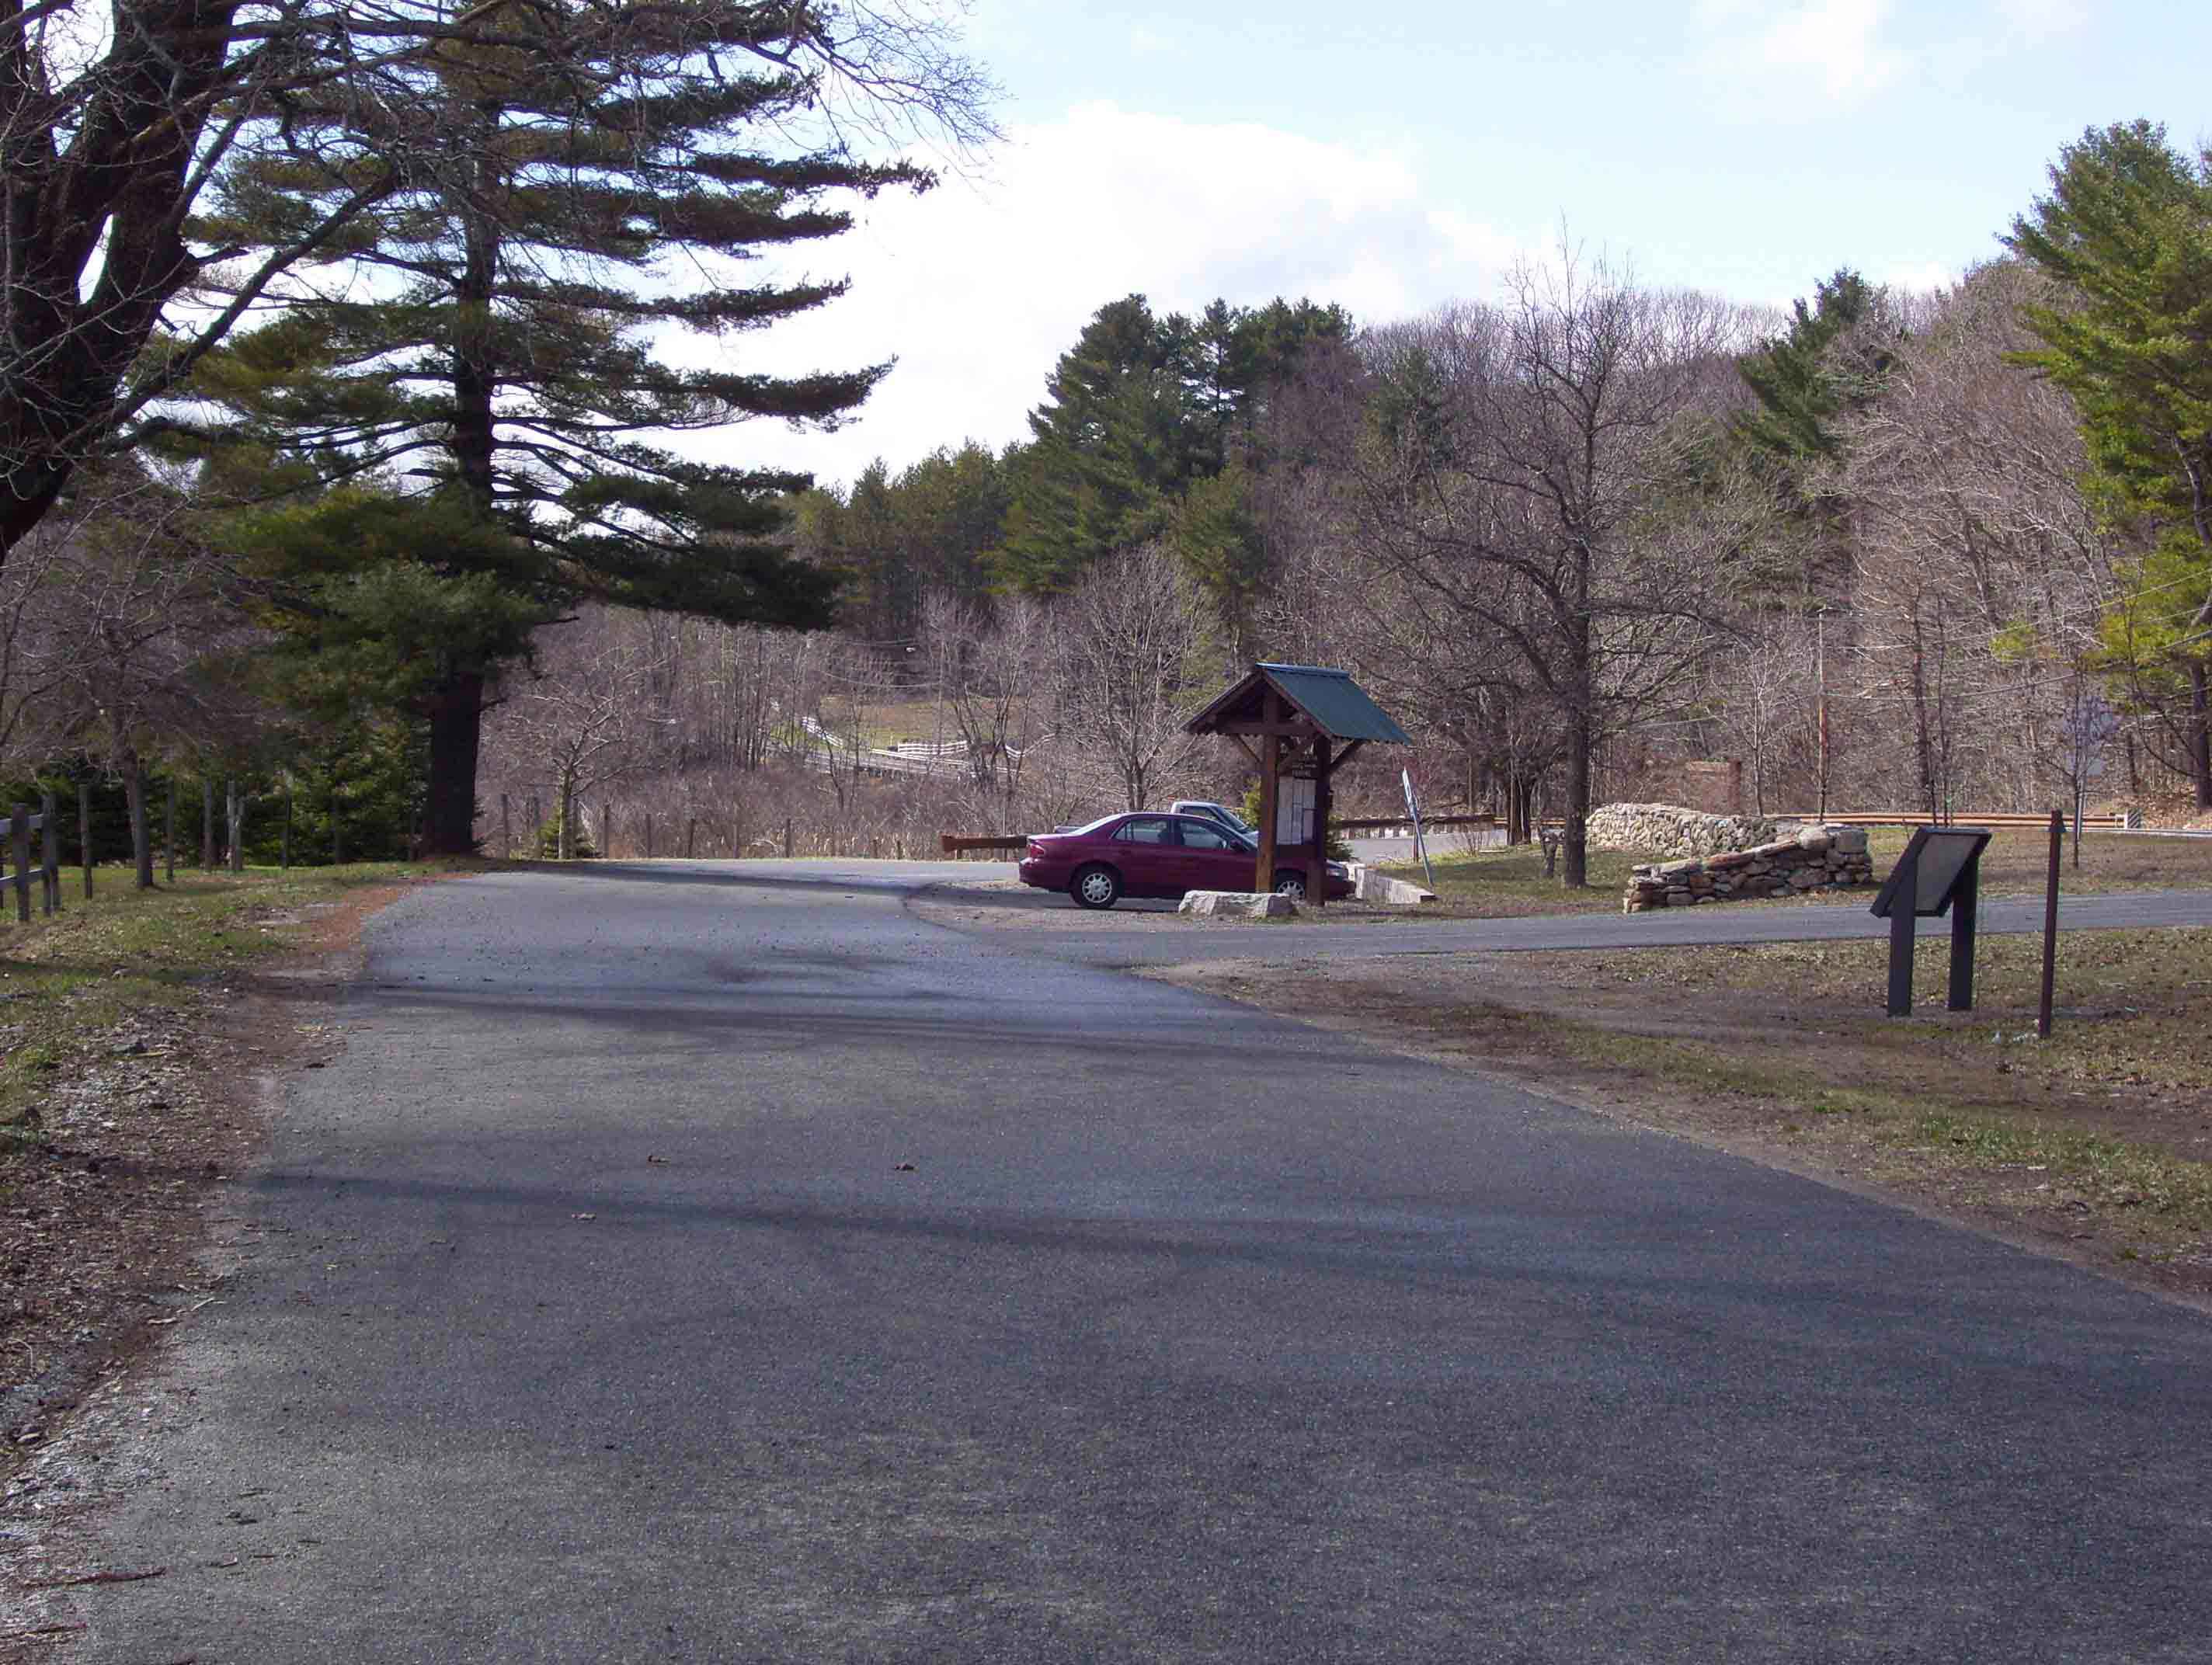 MM 0.0 Parking area about 100 yards west of trail crossing of US 20.  Courtesy dlcul@conncoll.edu